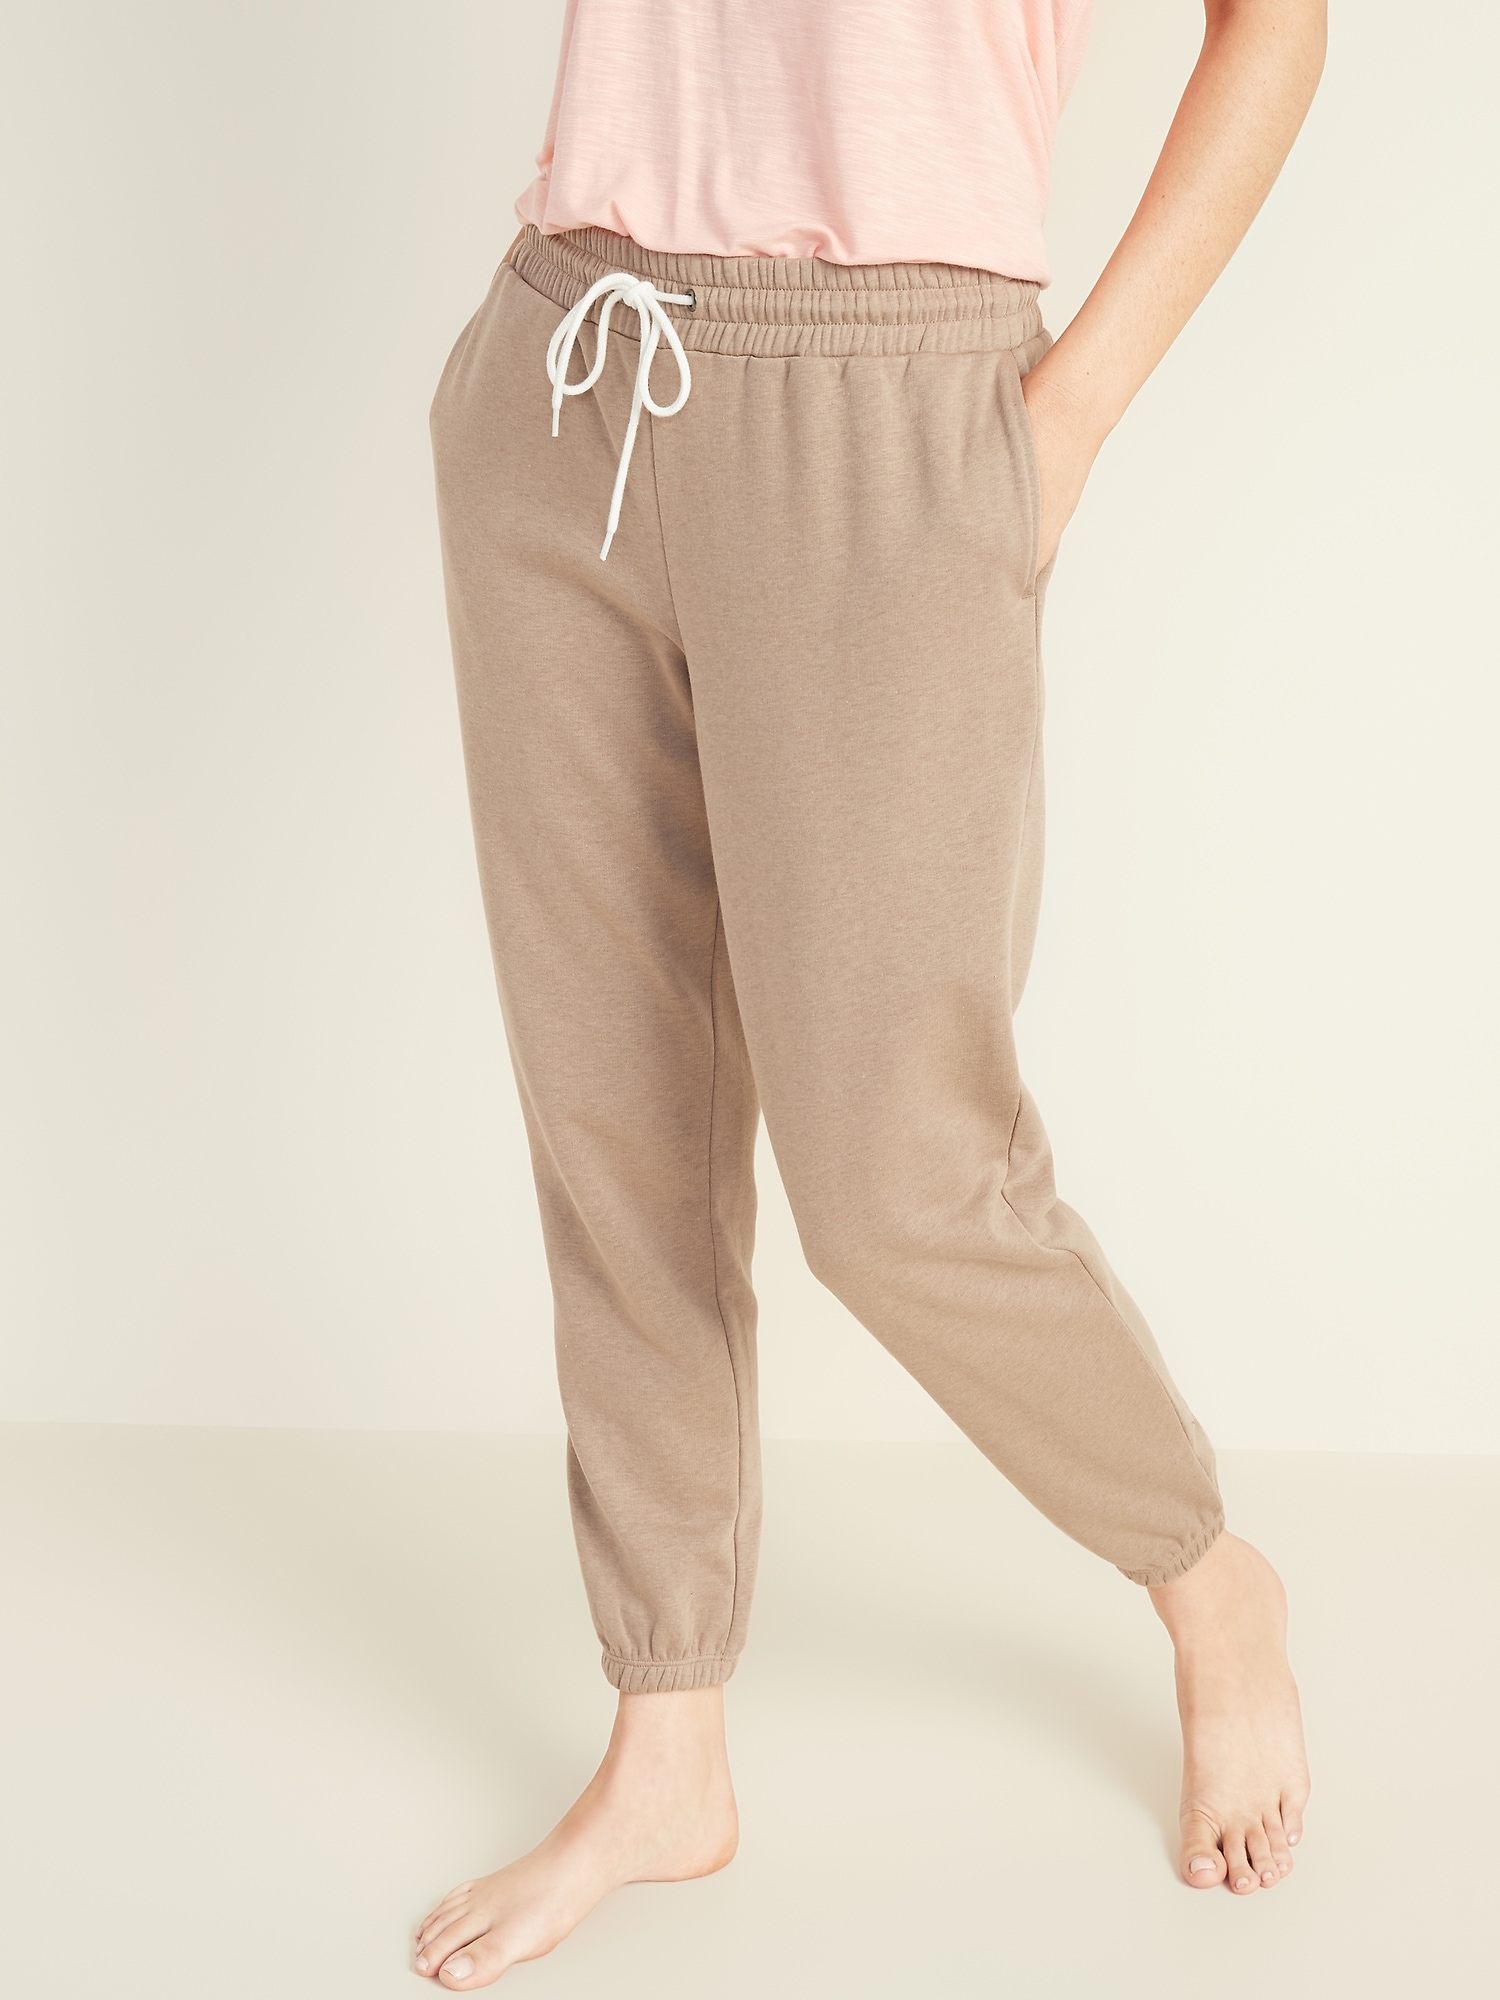 old navy womens tall sweatpants